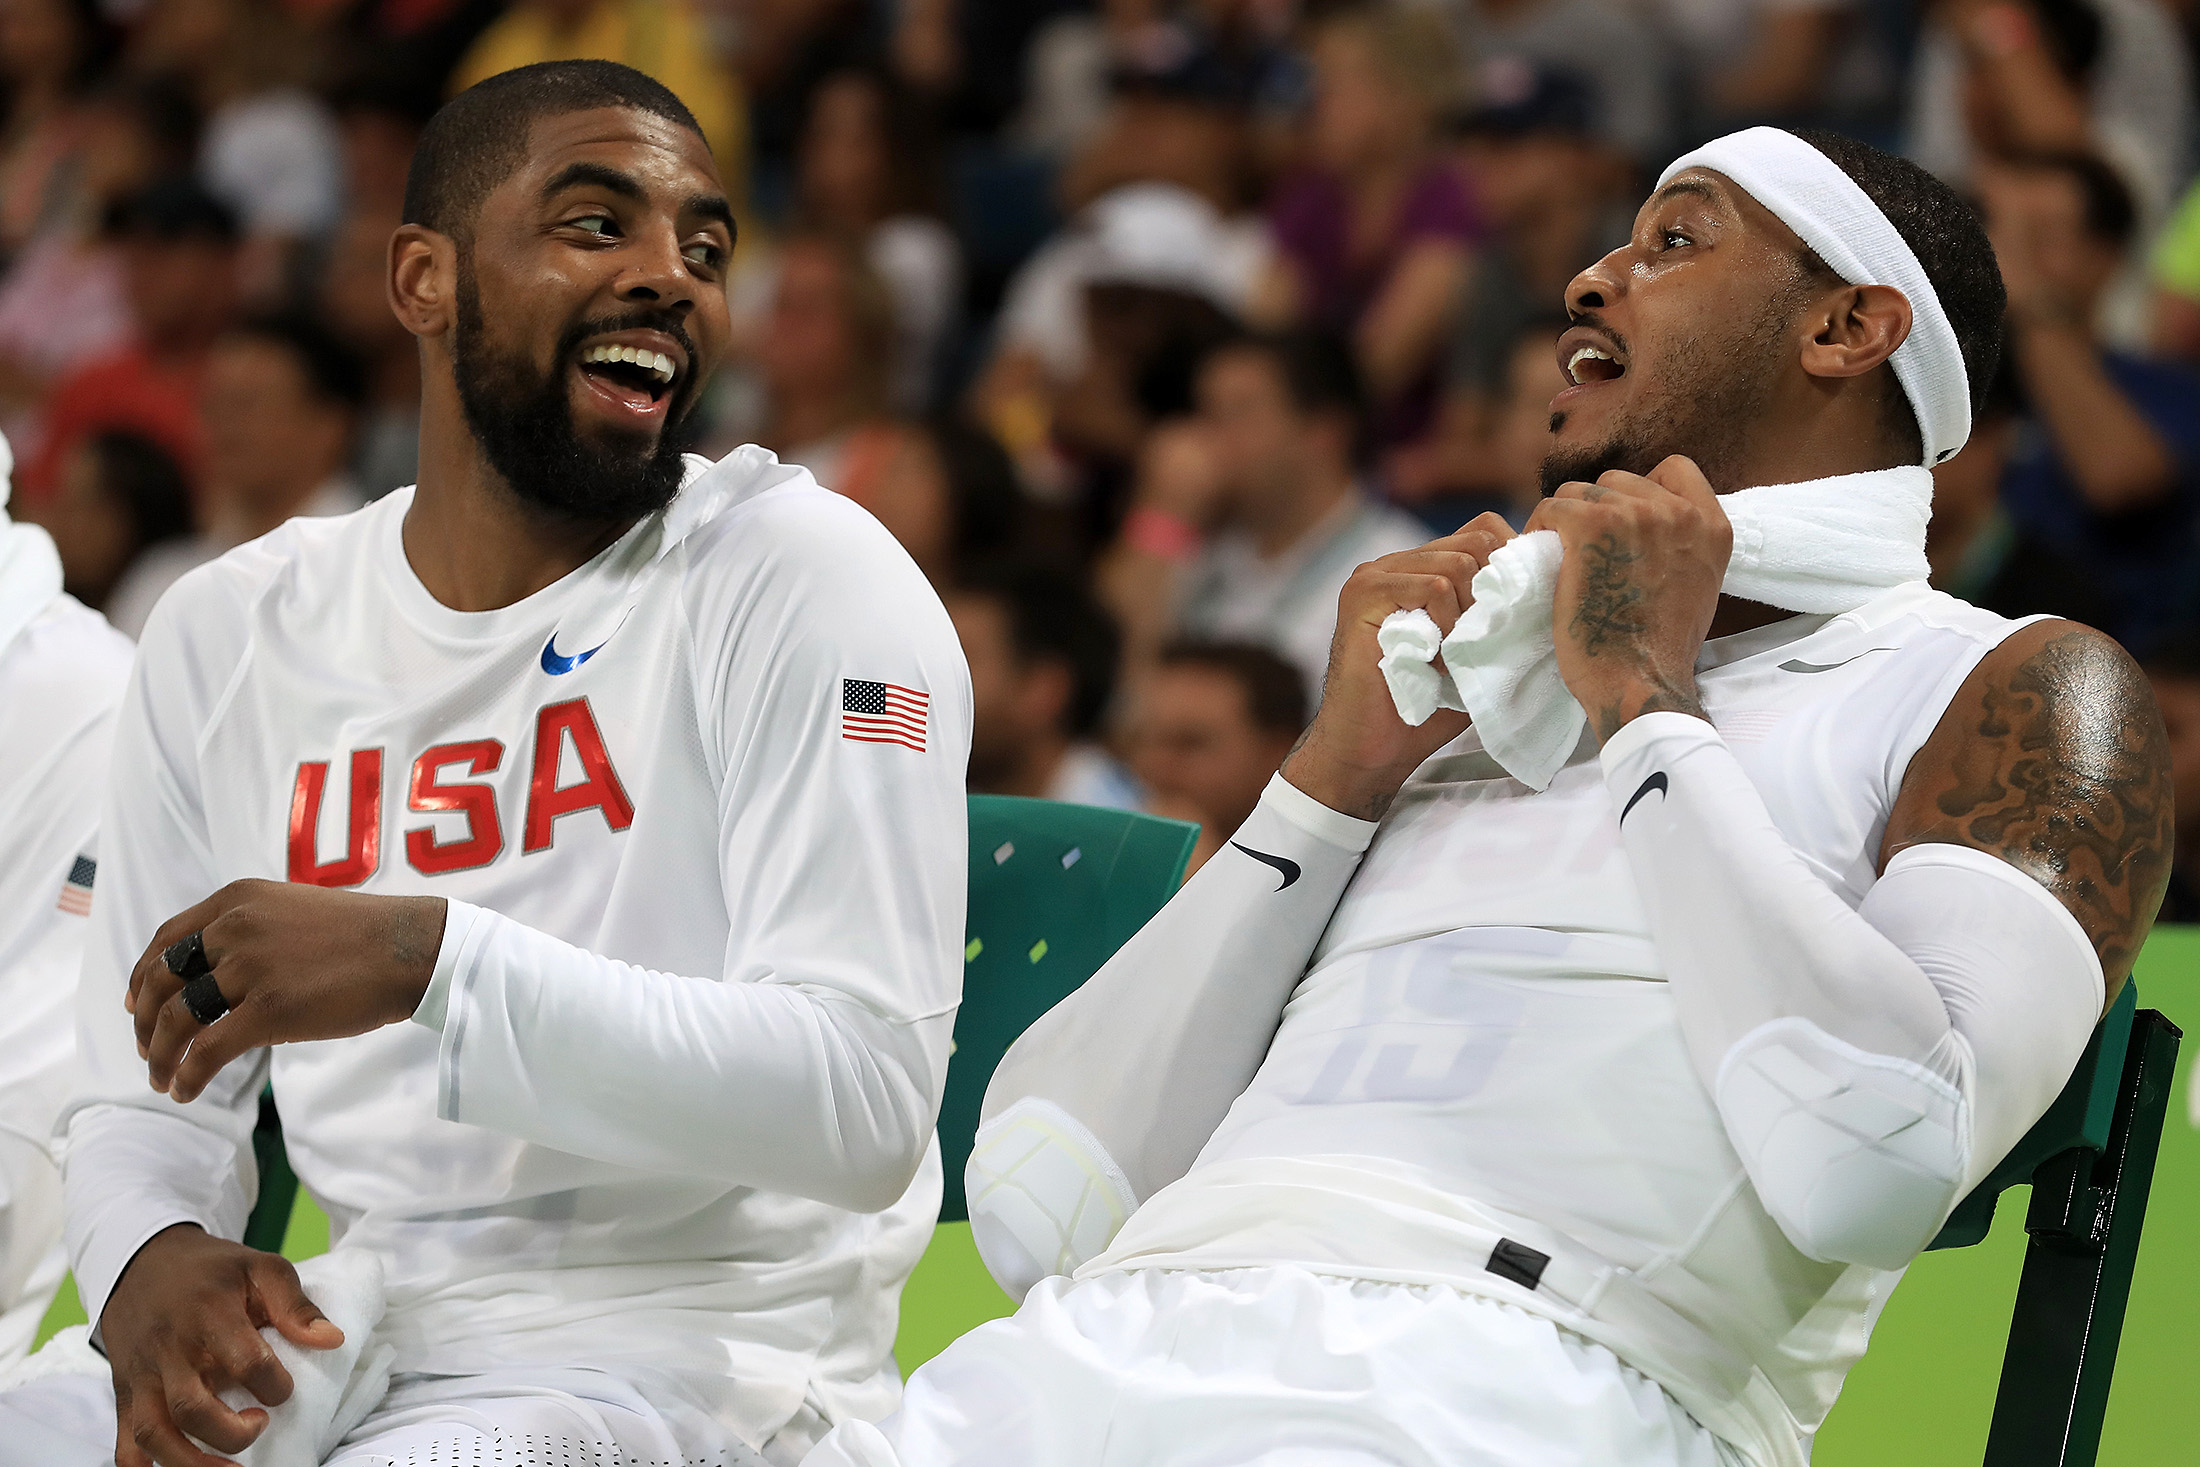 Team USA shifts focus to Olympics after World Cup defeat as LeBron James,  Steph Curry show interest